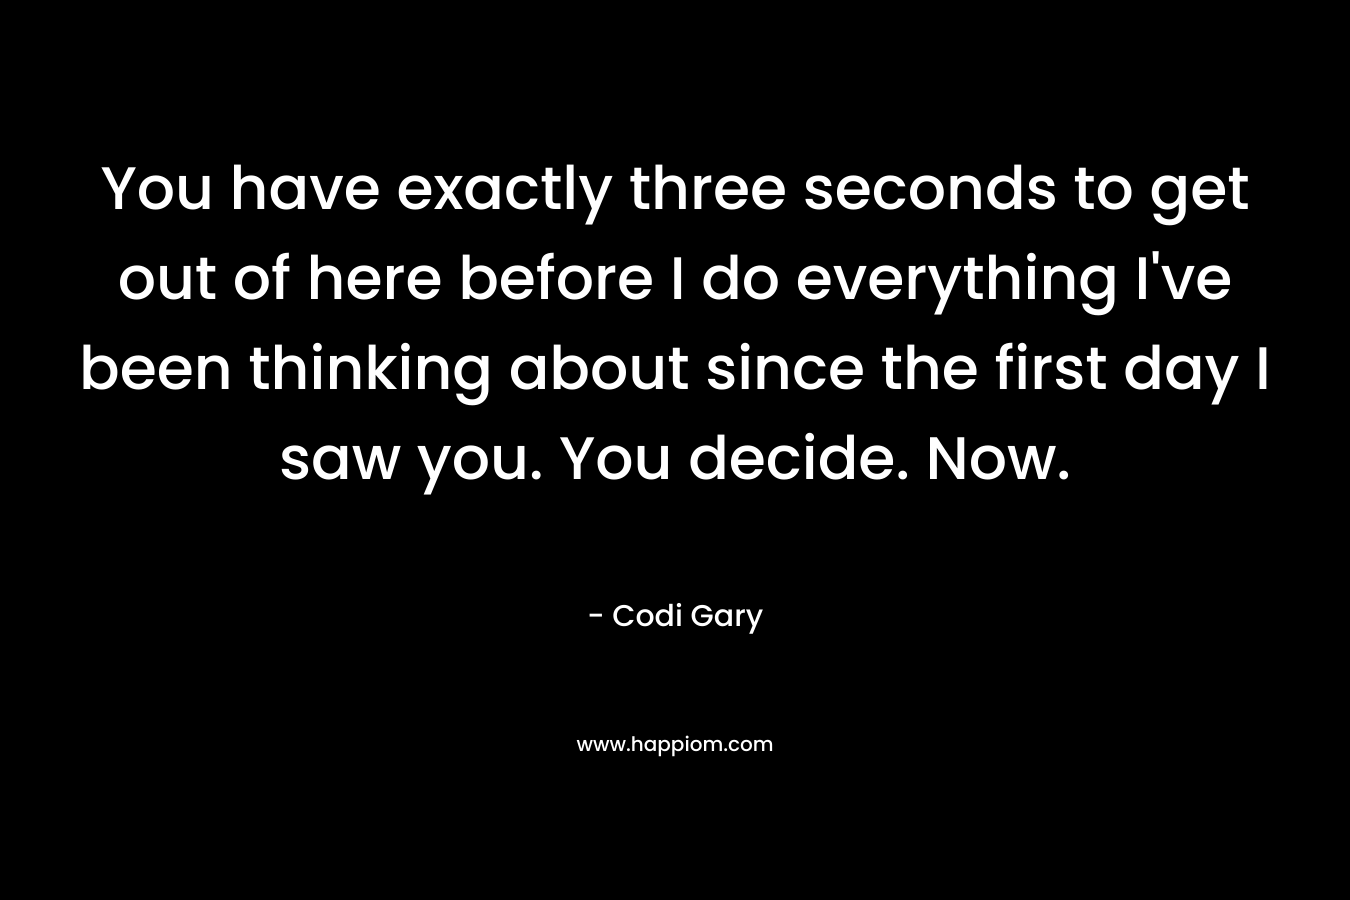 You have exactly three seconds to get out of here before I do everything I’ve been thinking about since the first day I saw you. You decide. Now. – Codi Gary